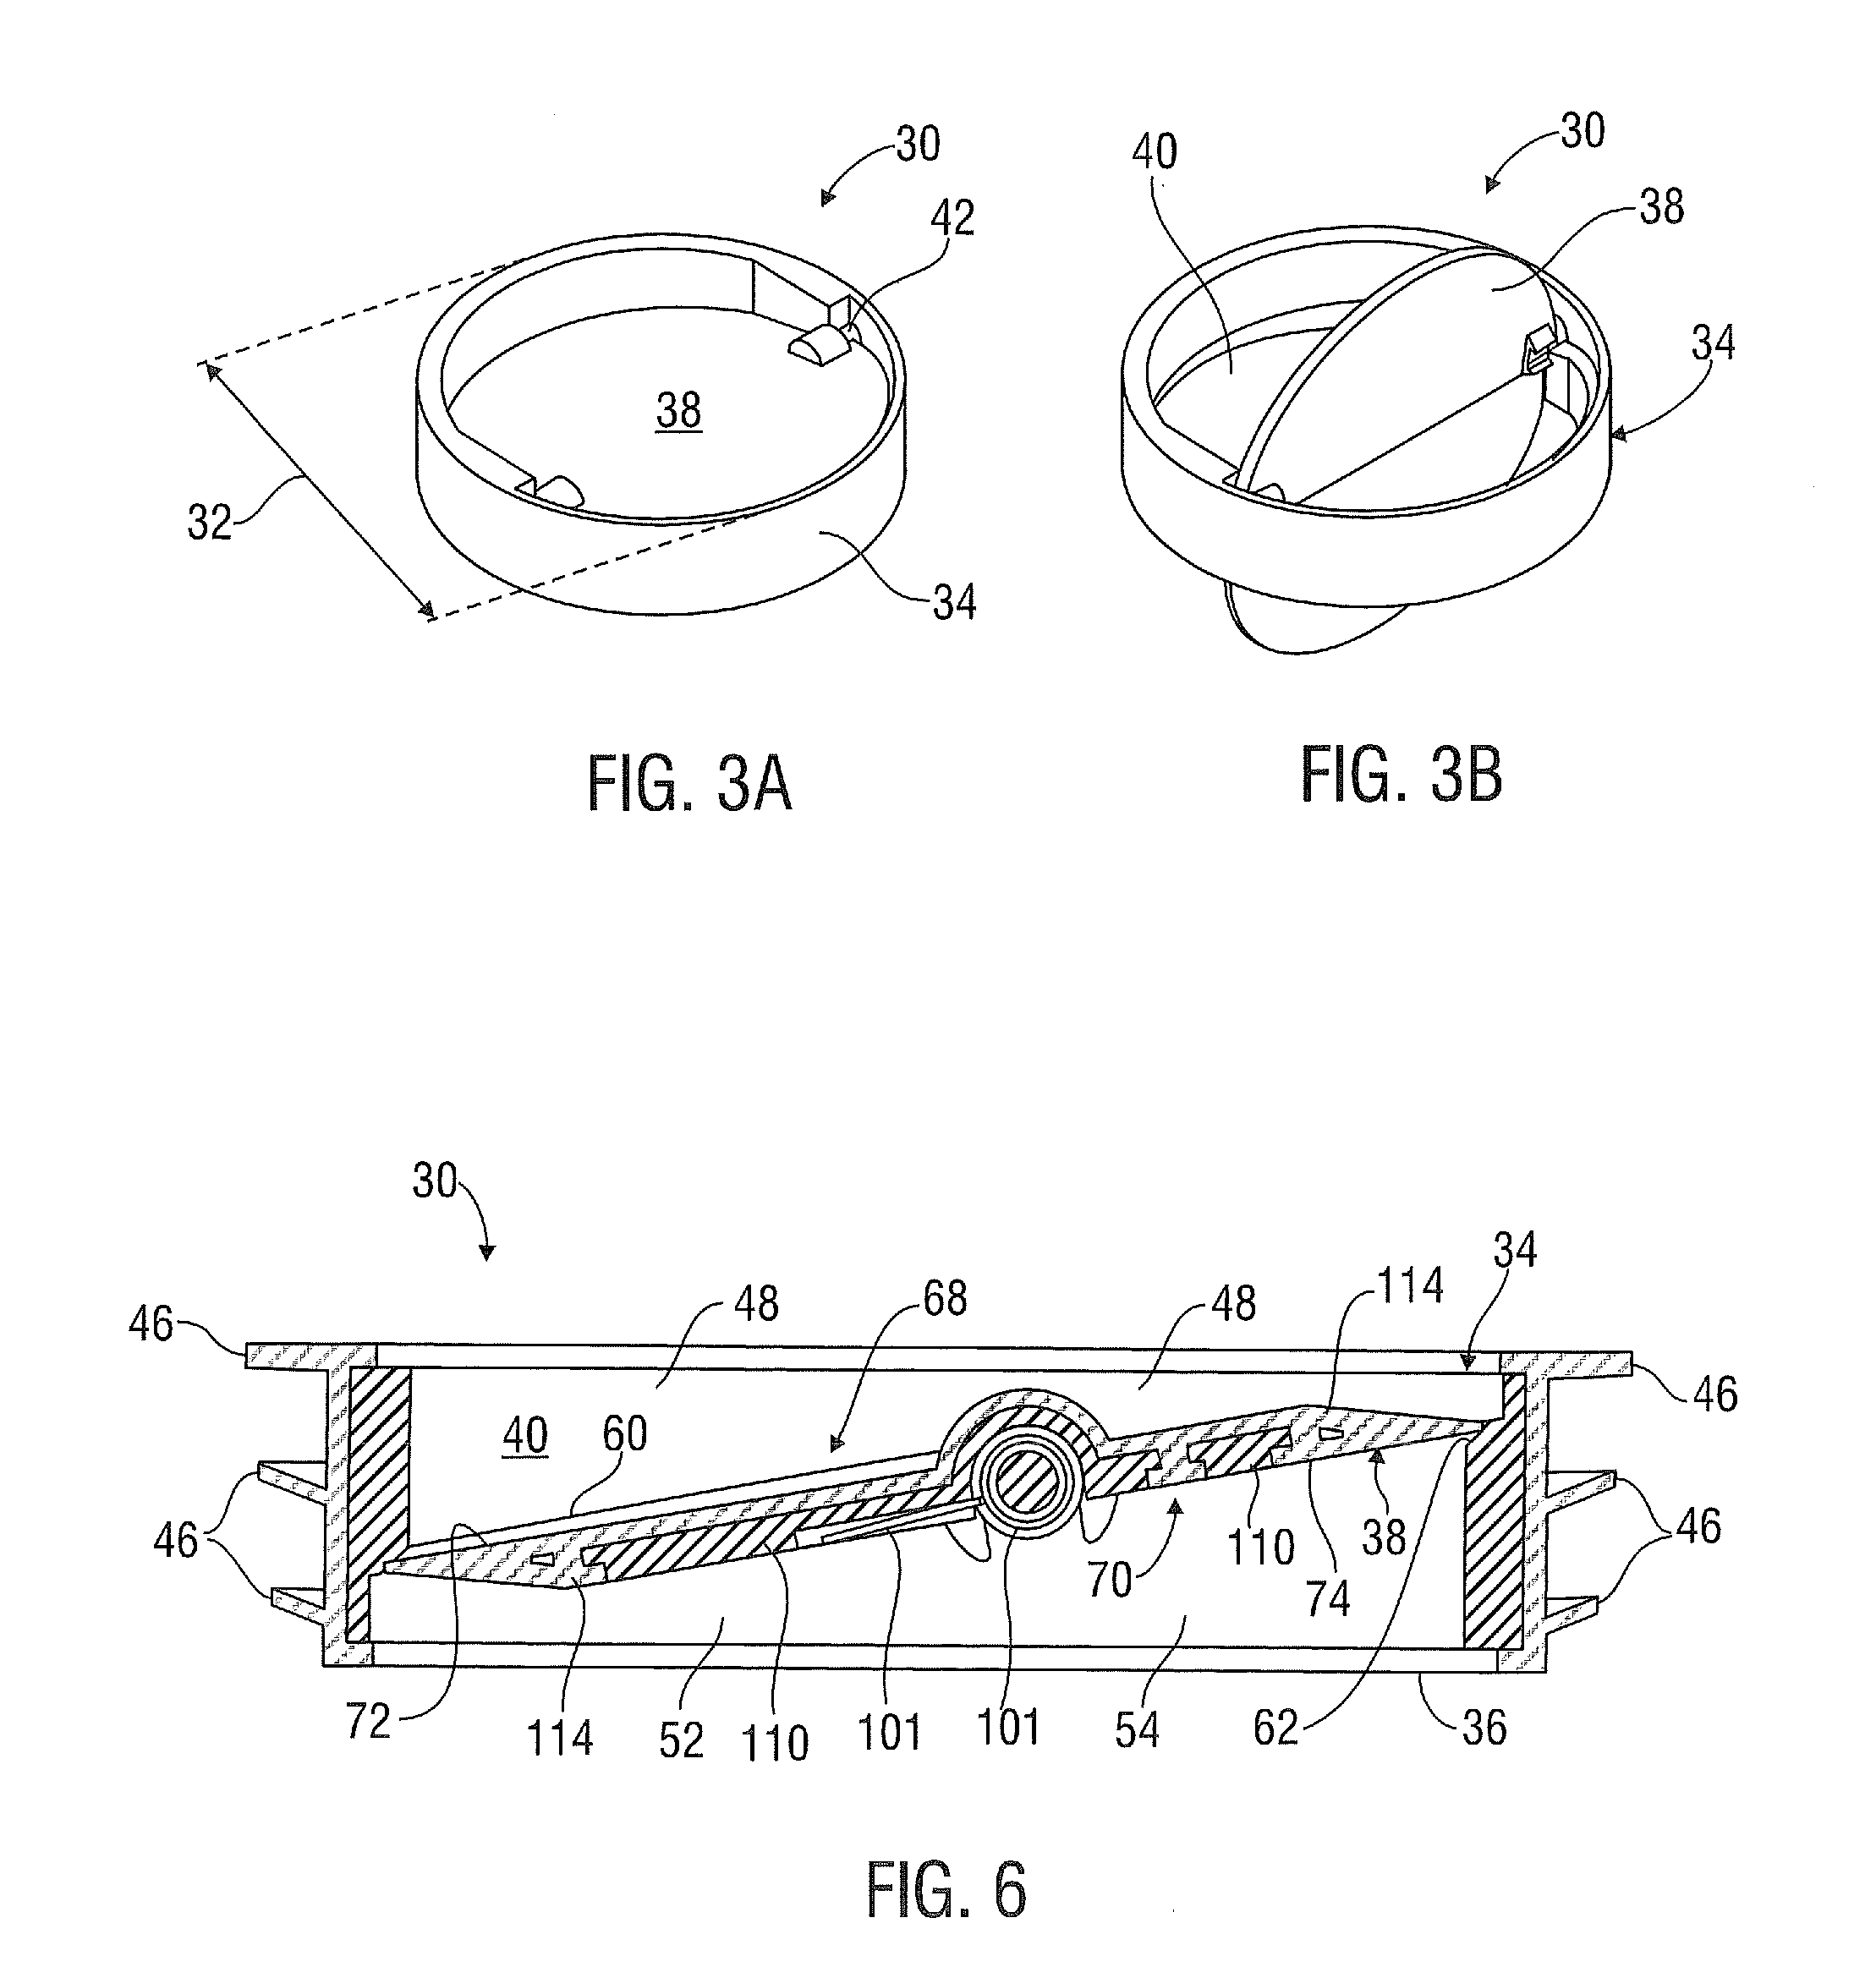 Apparatus and Methods for Limiting or Preventing Backflow of Gas up Through a Plumbing Fixture